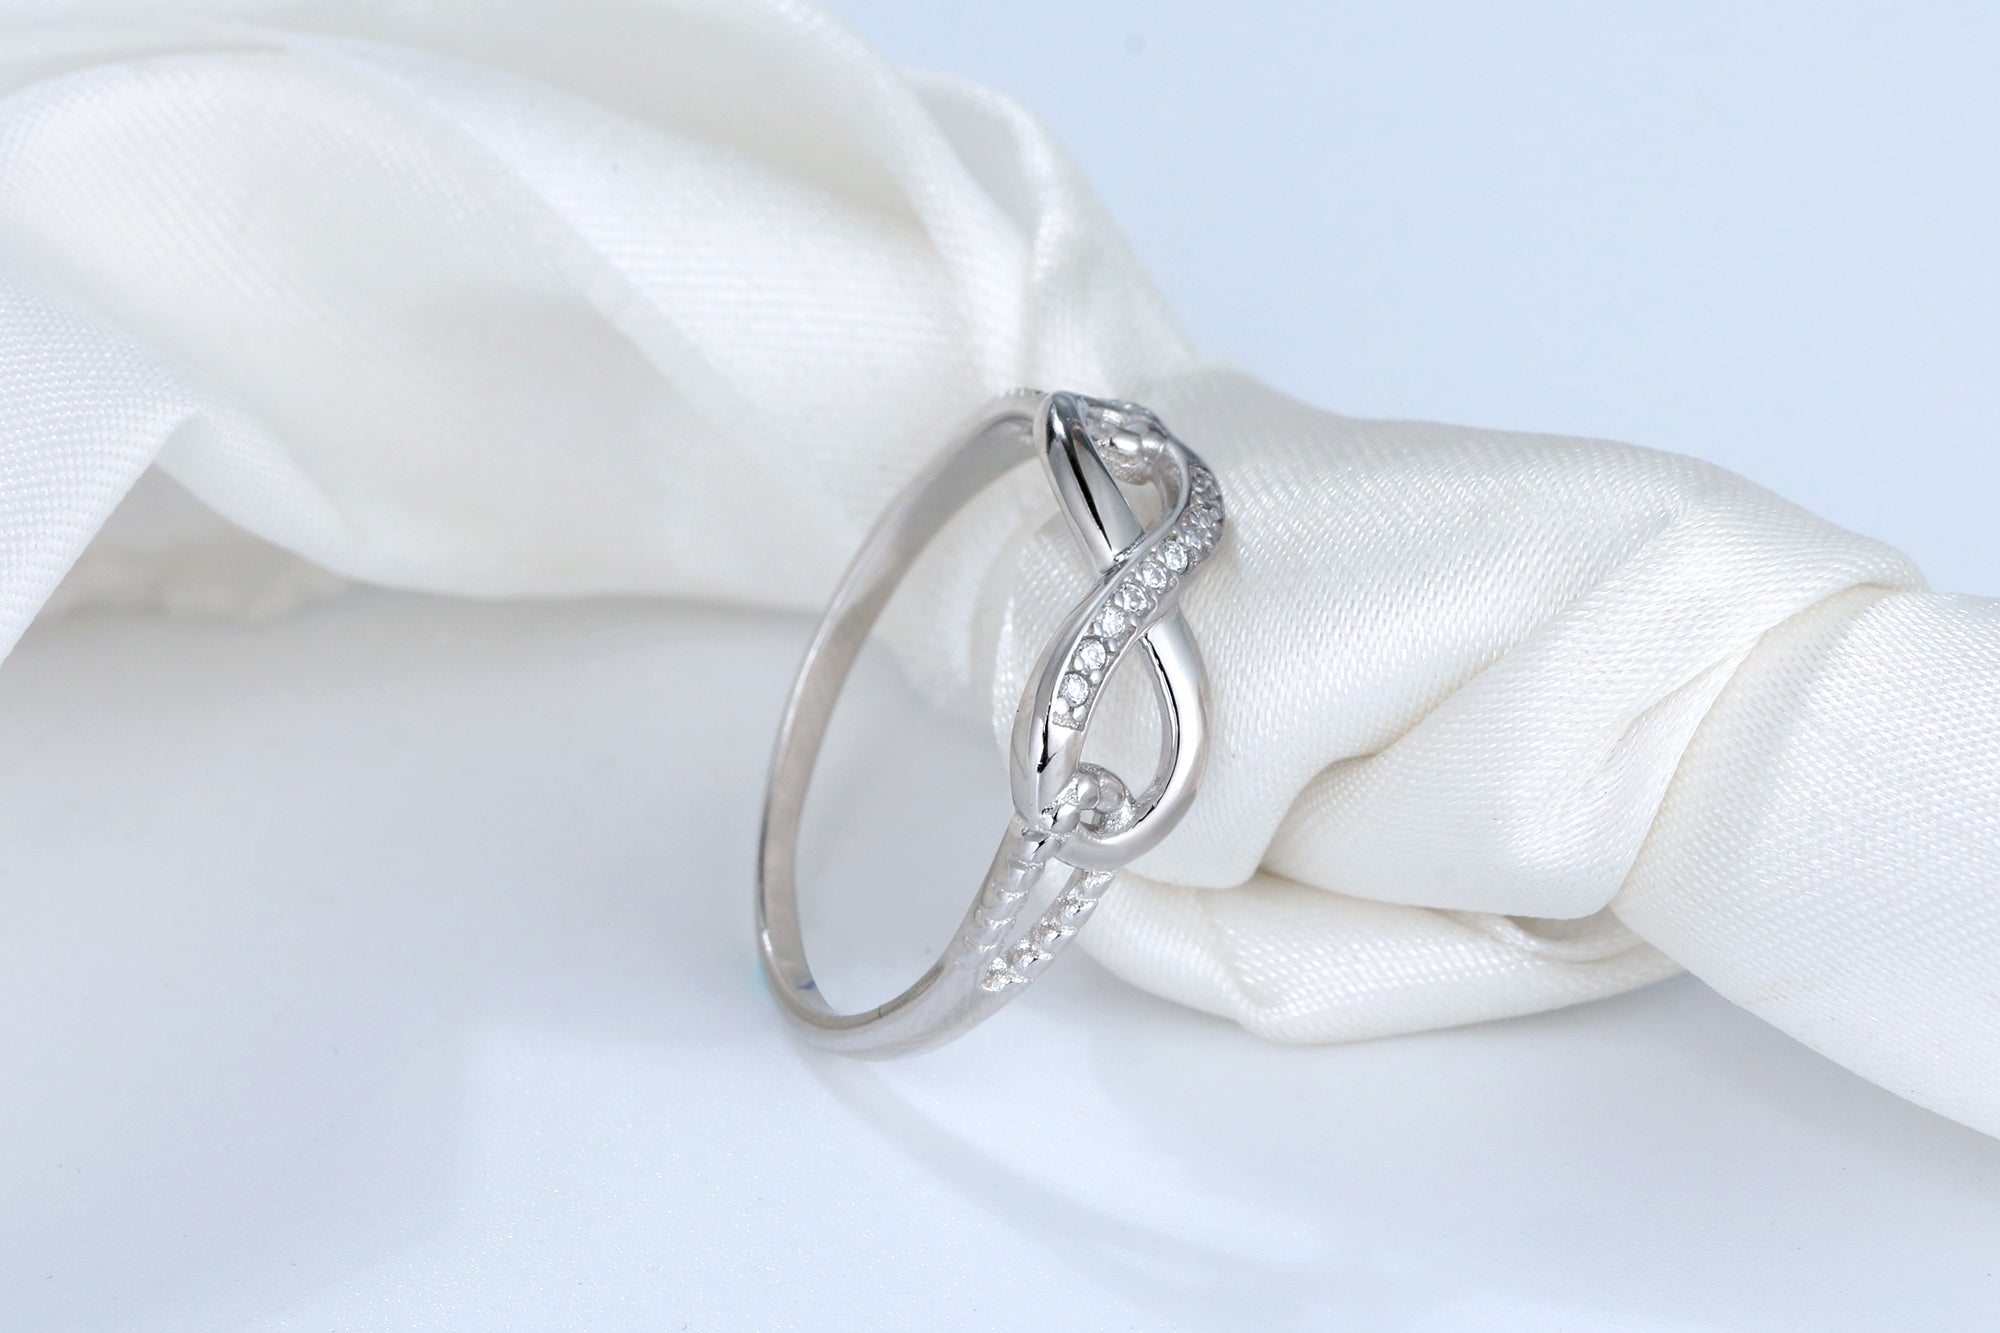 Infinity Promise Ring Sterling Silver Cubic Zirconia Women Ginger Lyne - 11